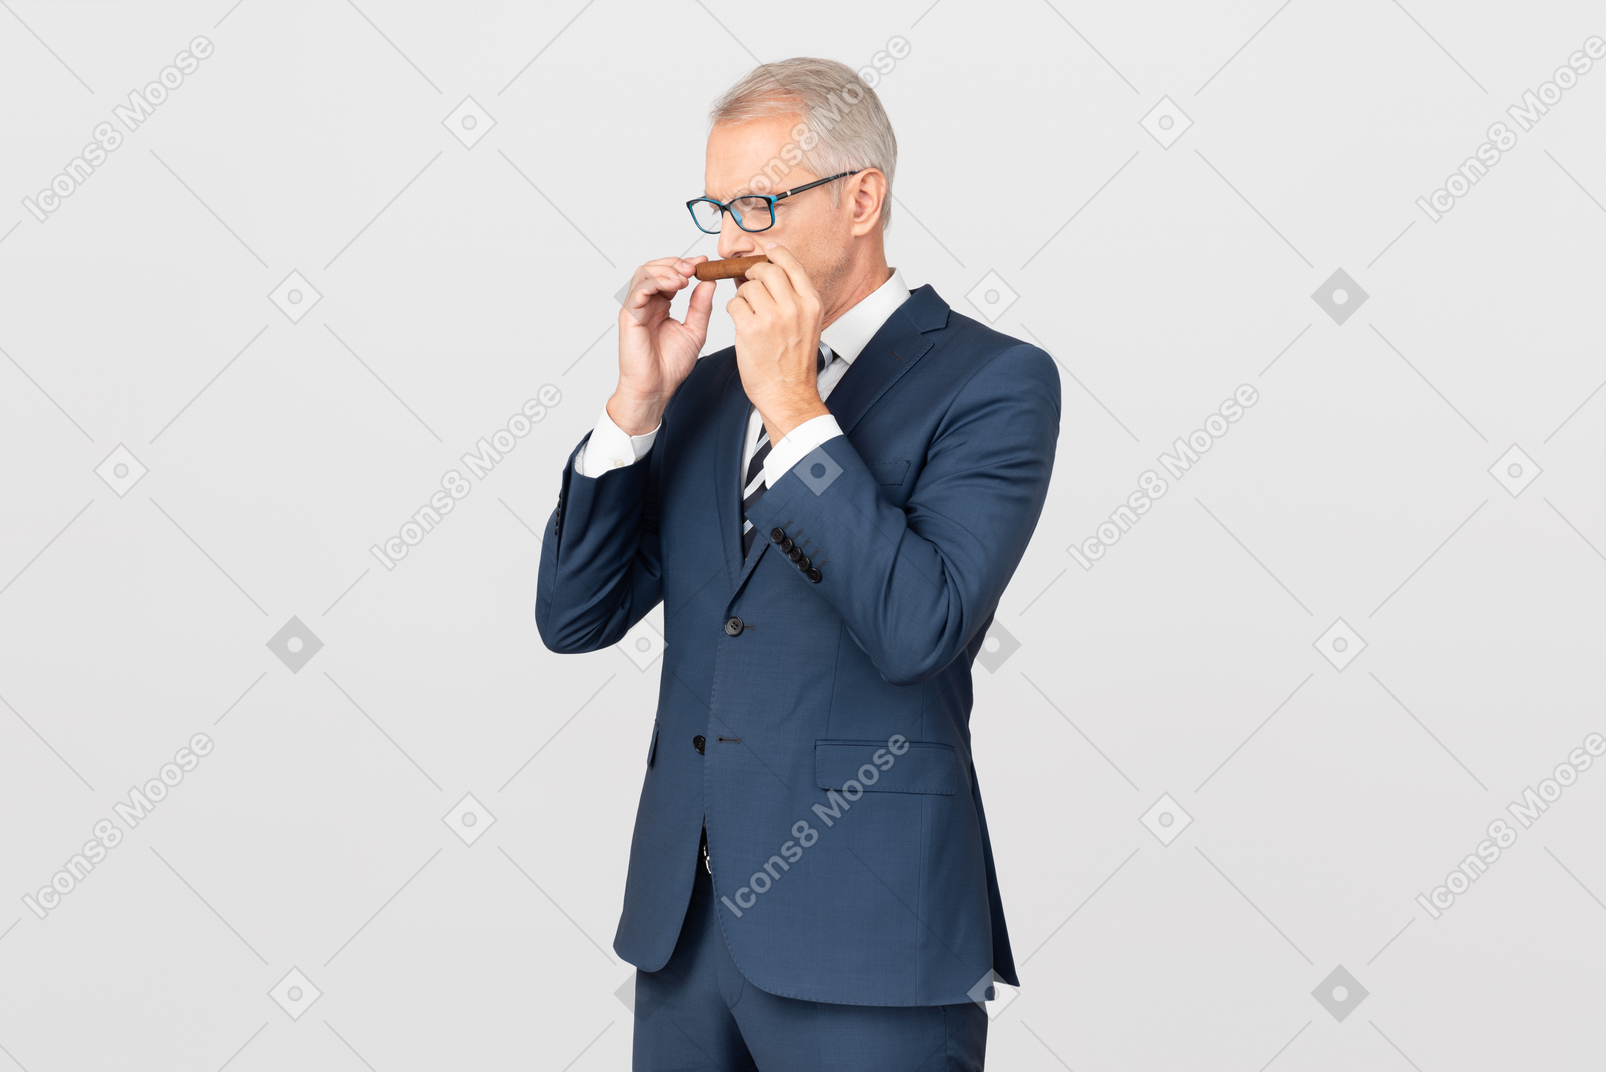 Handsome middle aged man with a cigar having a conversation